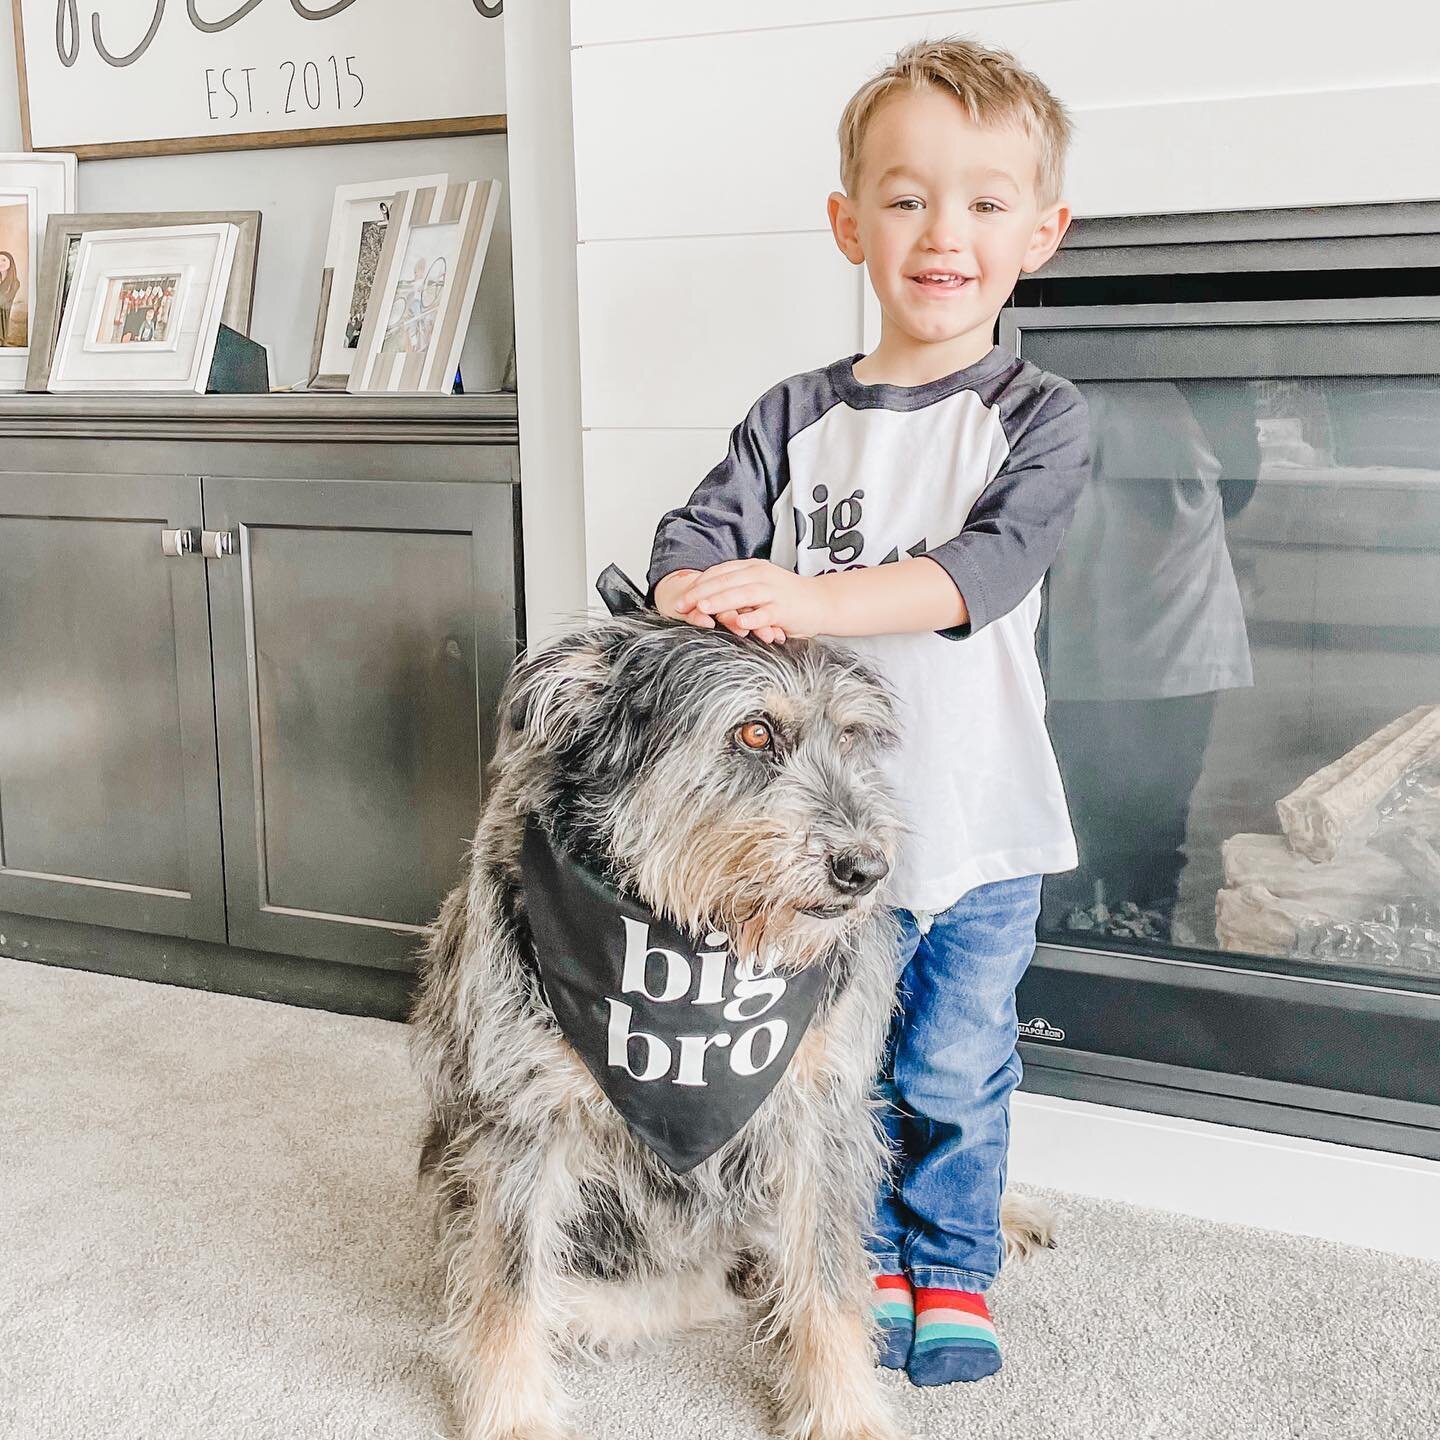 these Bica boys are excited to share that there will be a new member of their crew! baby Bica coming late August. ❤️

#pregnancyannouncement #dogofinstagram #toddlersofinstagram #baby2ontheway #momoftwo #midwestmomma #thisjoyfulmoment #toddlerstyle